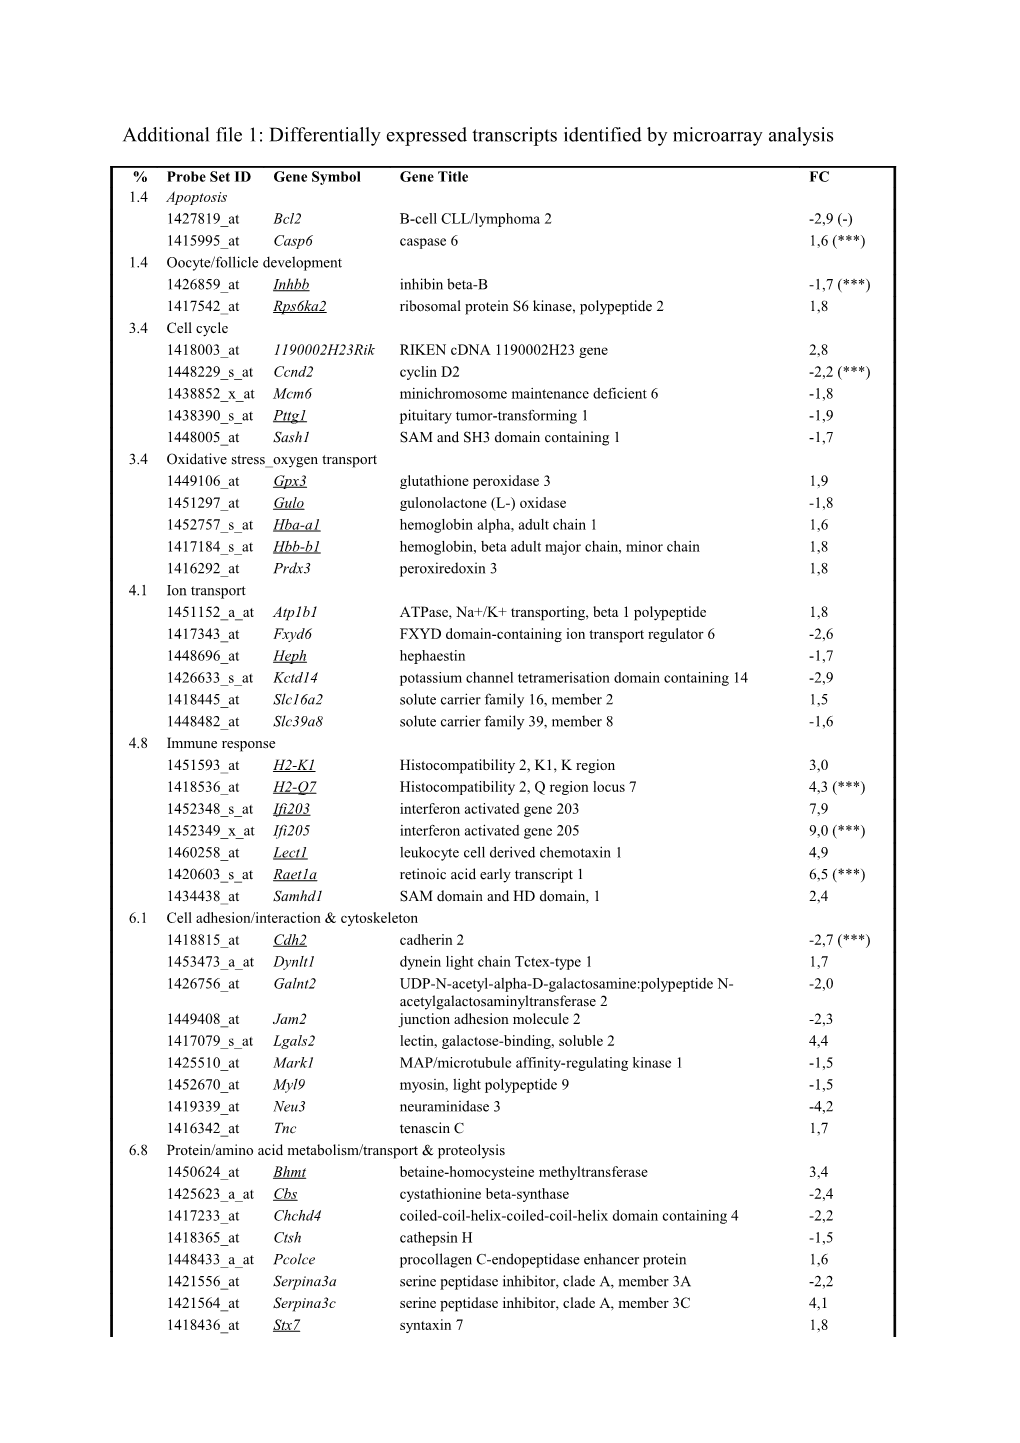 Additional File 1: Differentially Expressed Transcripts Identified by Microarray Analysis